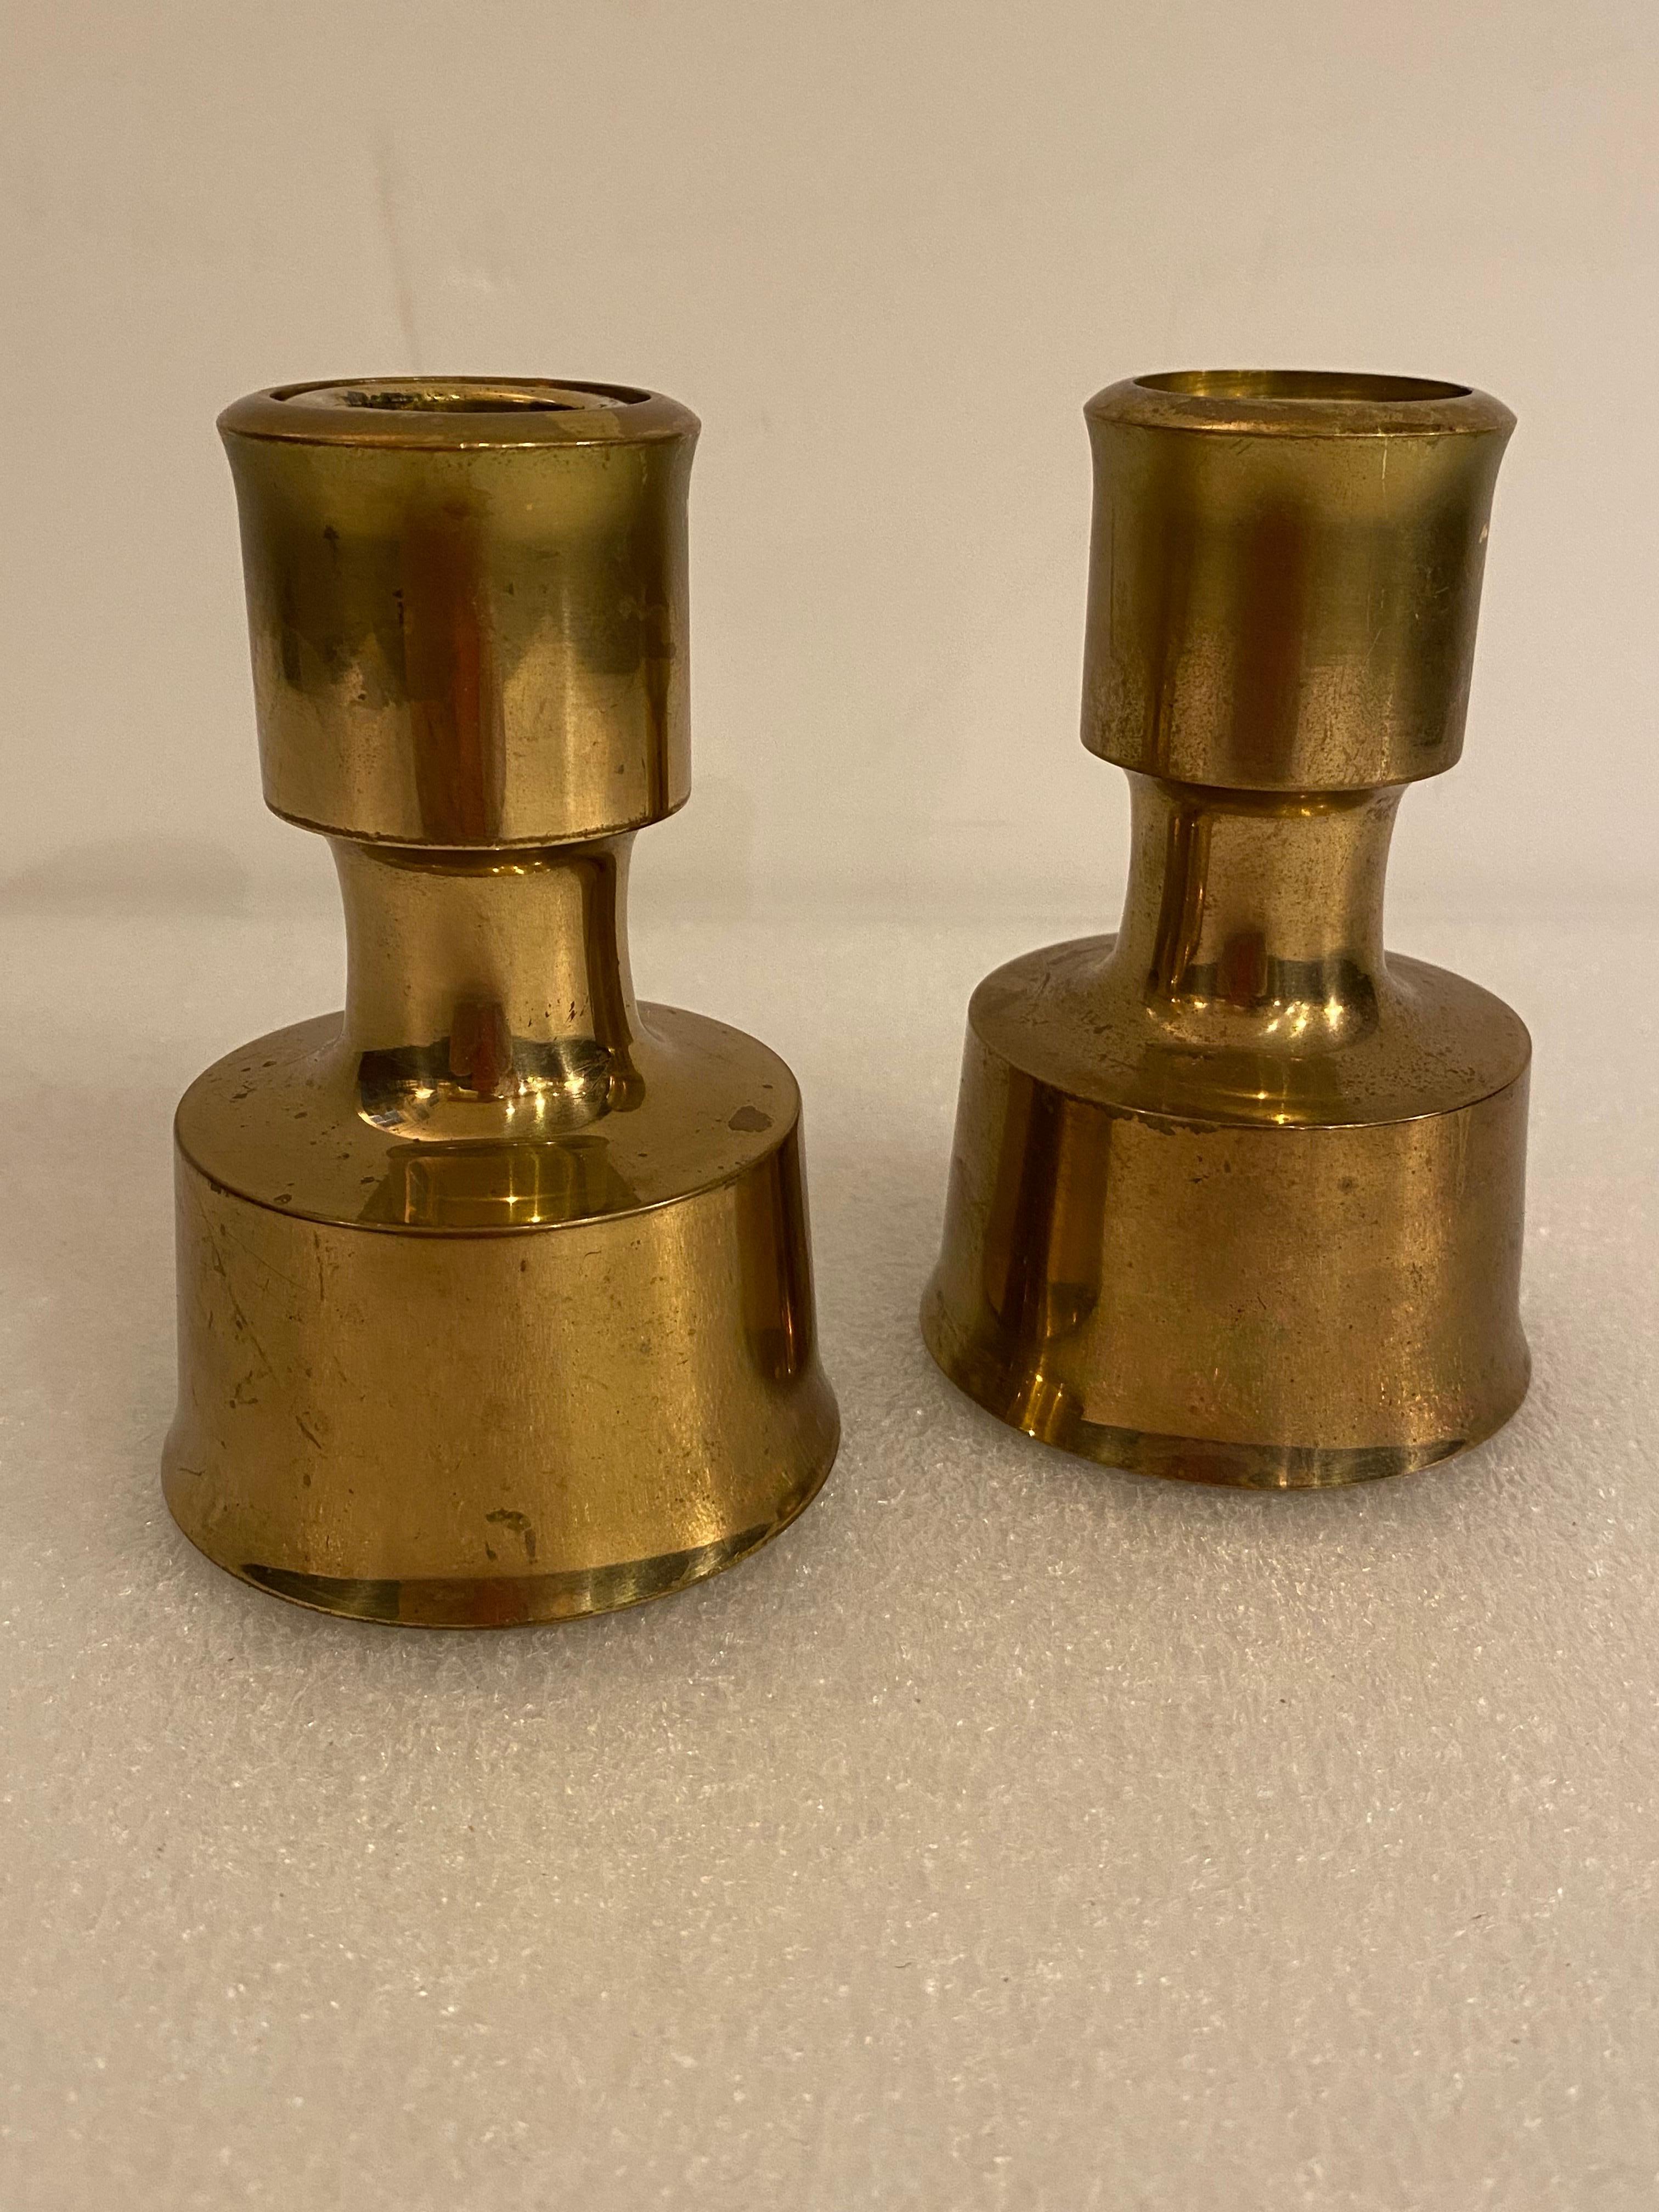 Jens Quistgaard Solid Brass Candlesticks with fitted rings to allow for 2 sizes of candles.  Nice Original condition, signed on bottom.